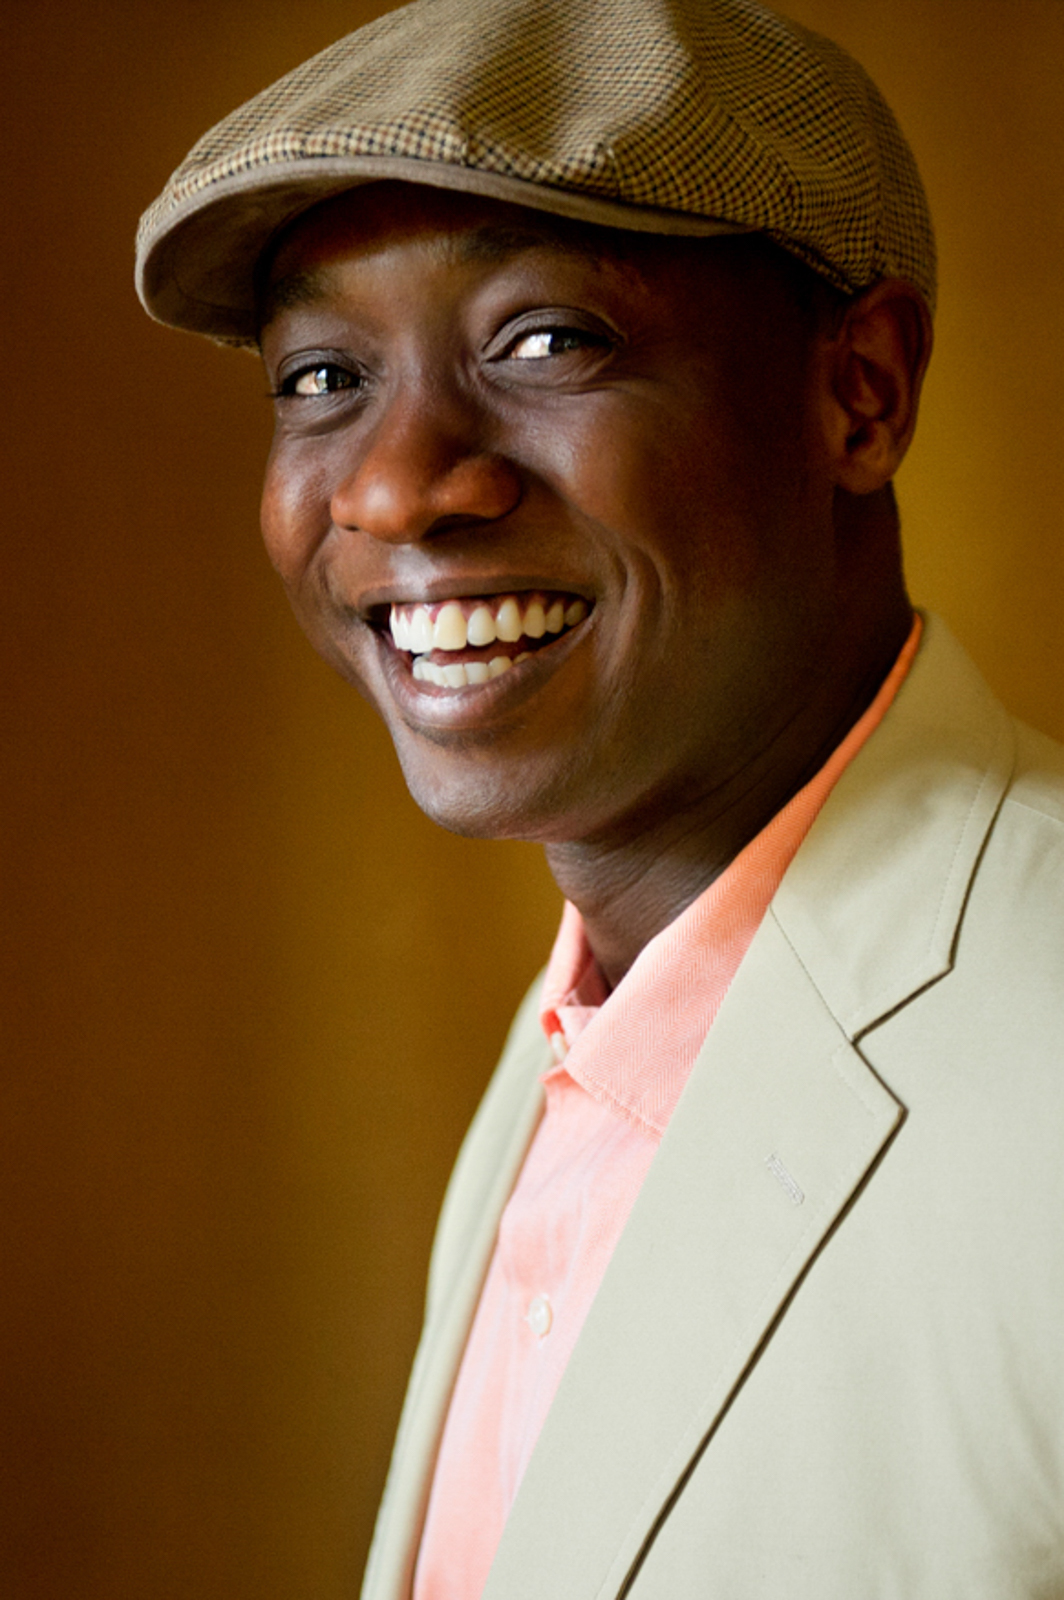 Portrait of man smiling wearing a hat